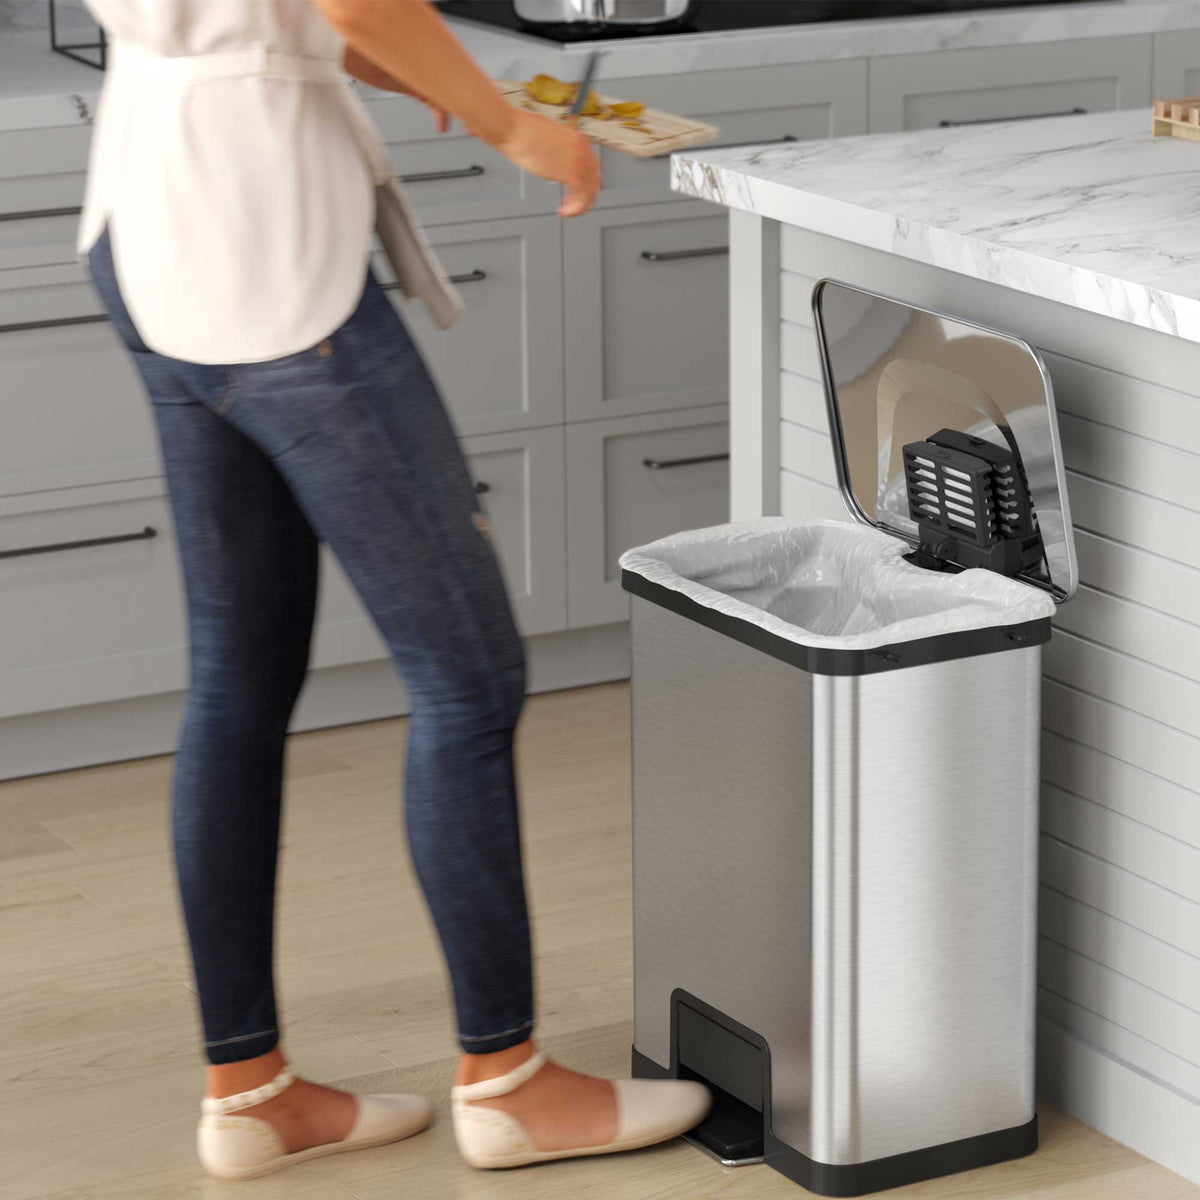 13 Gallon AirStep Step Pedal Trash Can in kitchen